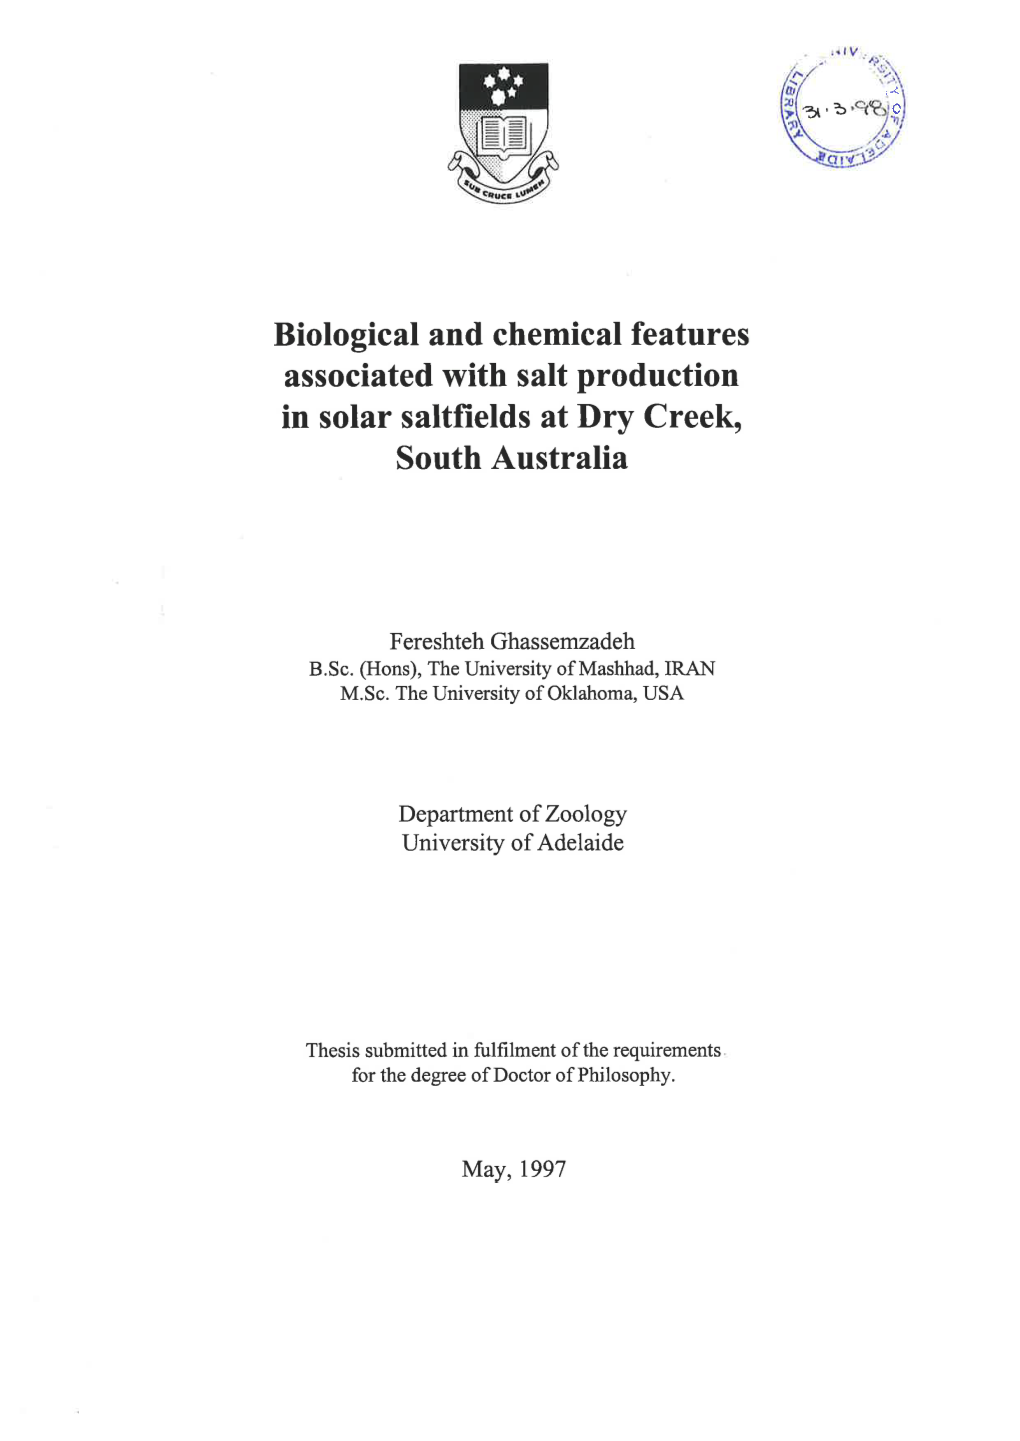 Biological and Chemical Features Associated with Salt Production in Solar Saltfields at Dry Creek, South Australia